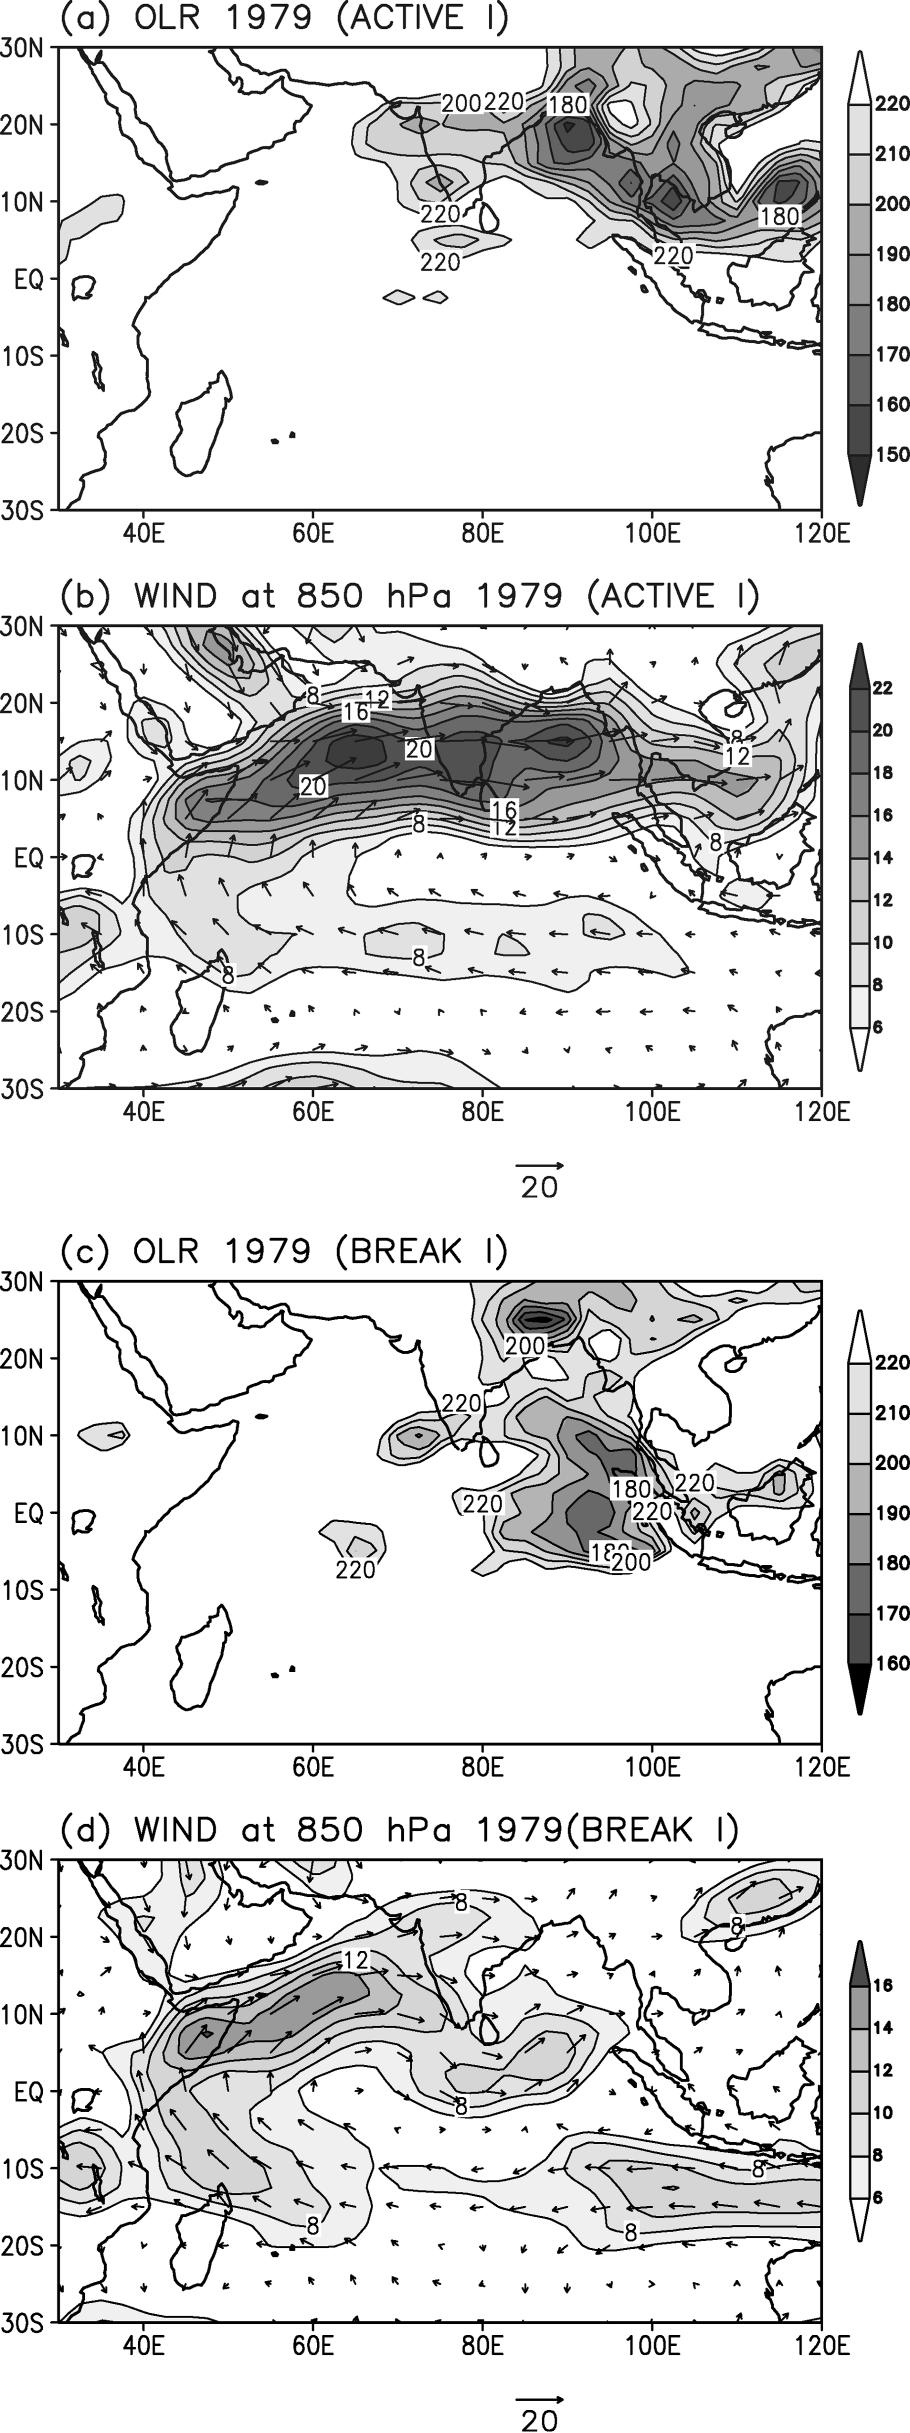 1APRIL 2004 JOSEPH AND SIJIKUMAR 1457 heating of the atmosphere over the Bay of Bengal and the LLJ over south Asia have been investigated. The following are the important conclusions.